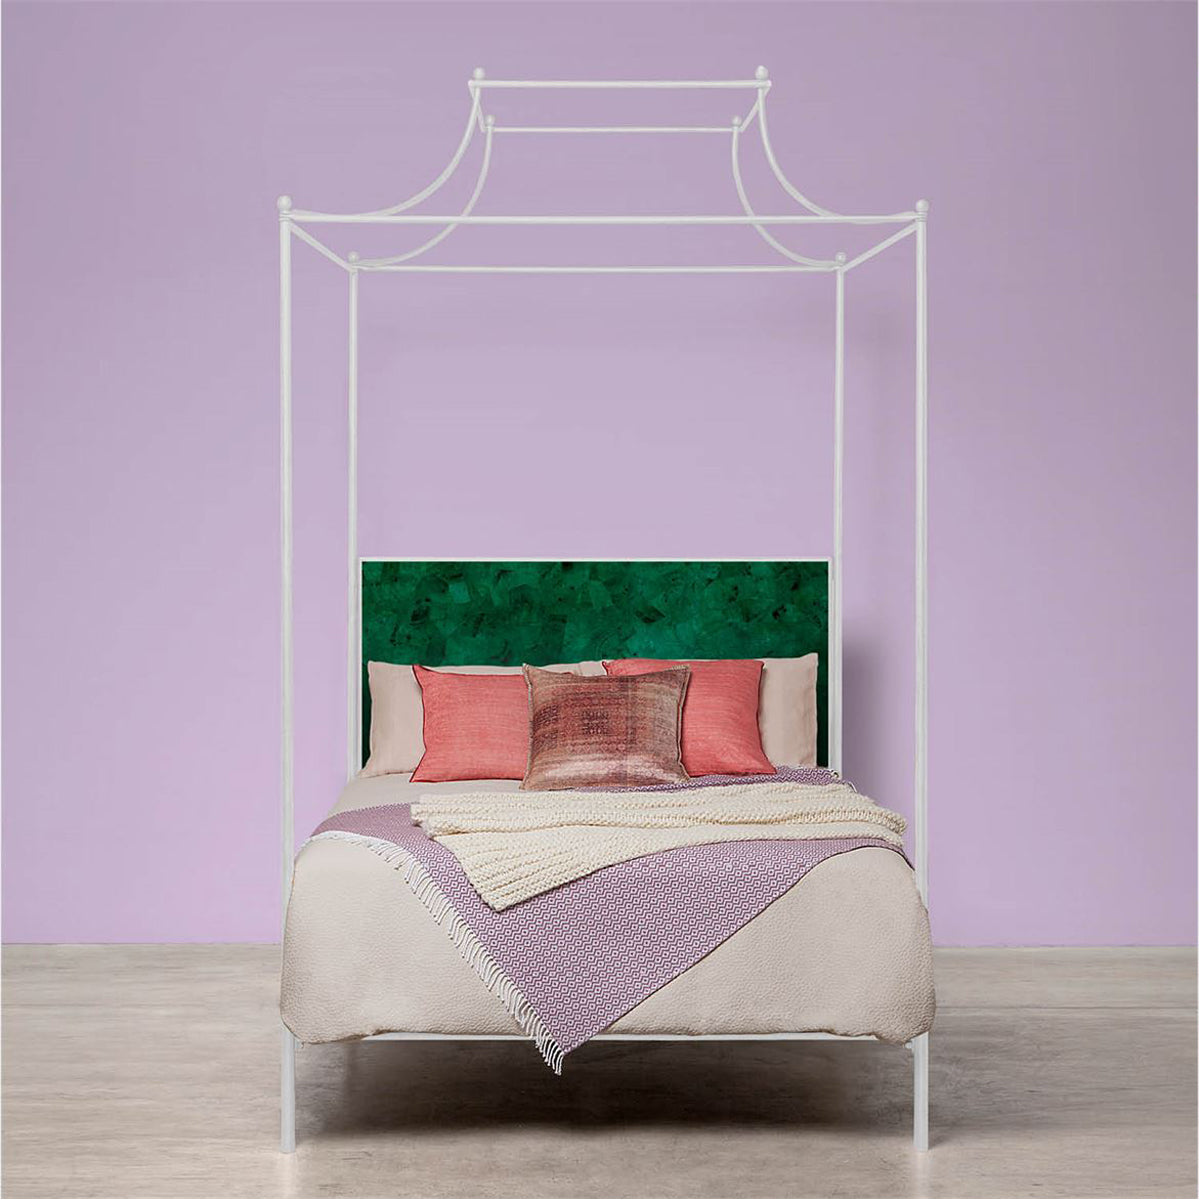 Made Goods Janelle Scalloped Iron Canopy Bed in Nile Fabric